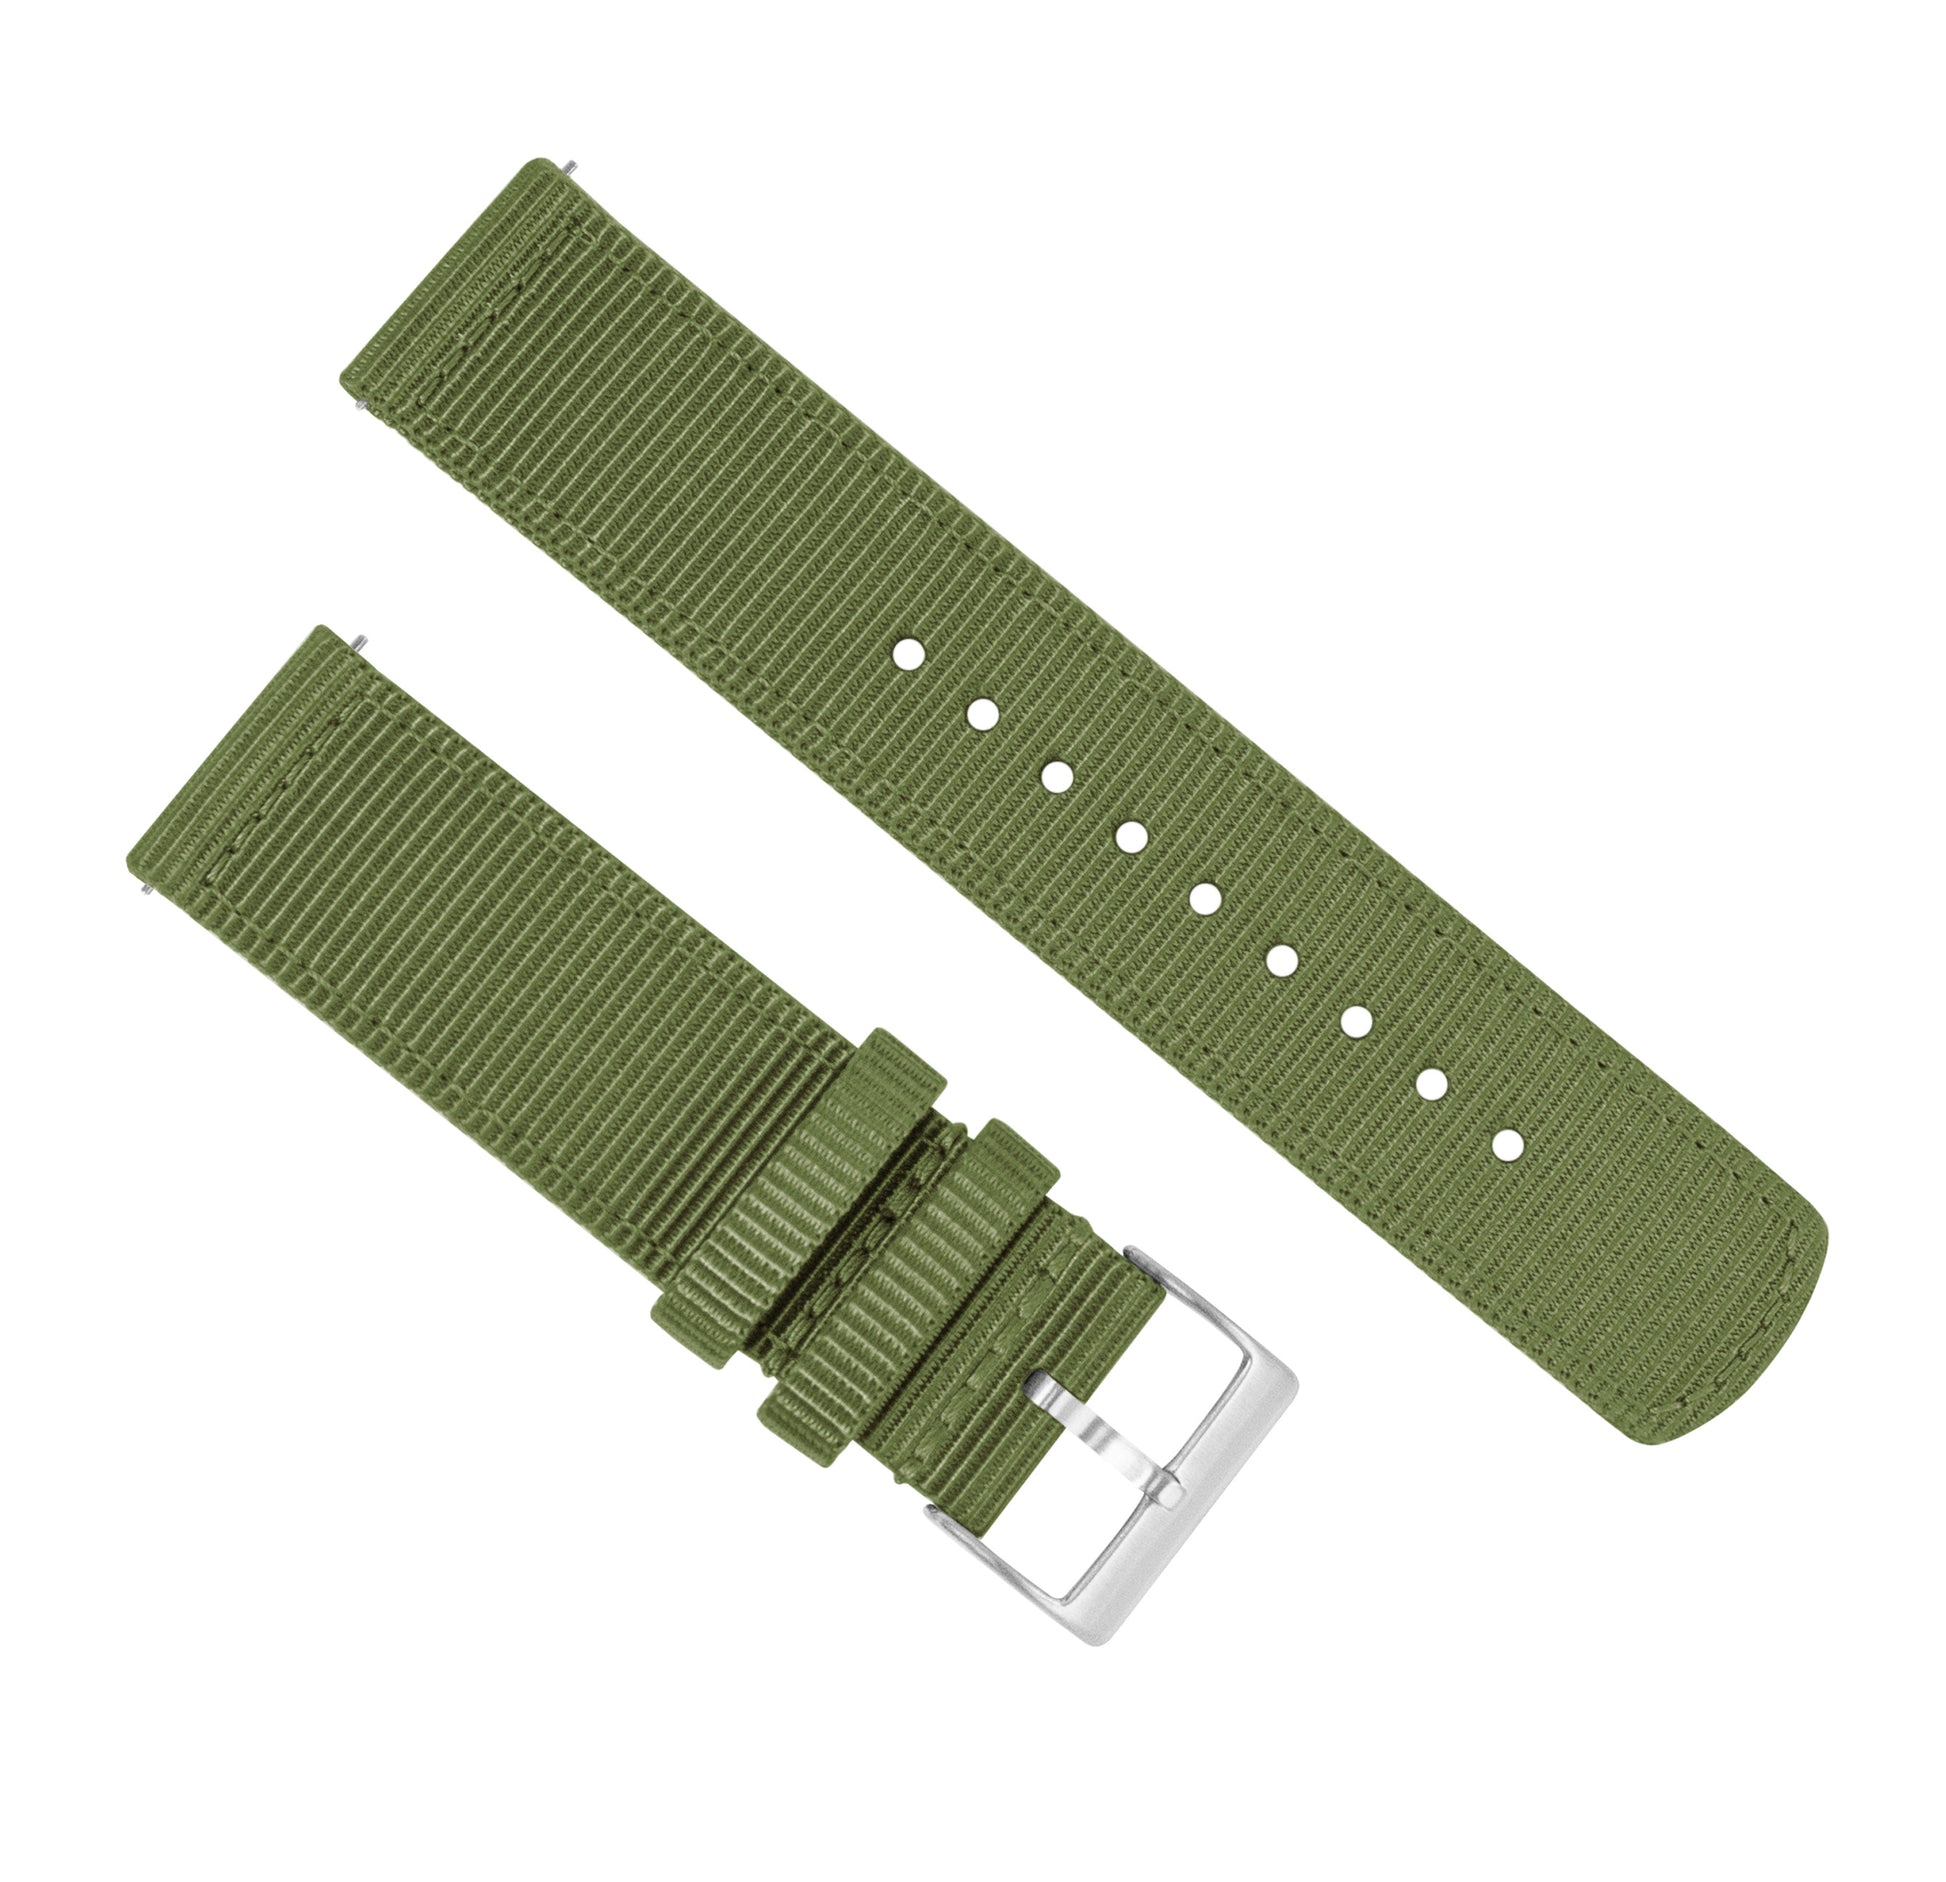 Samsung Galaxy Watch3 | Two-Piece NATO Style | Army Green - Barton Watch Bands